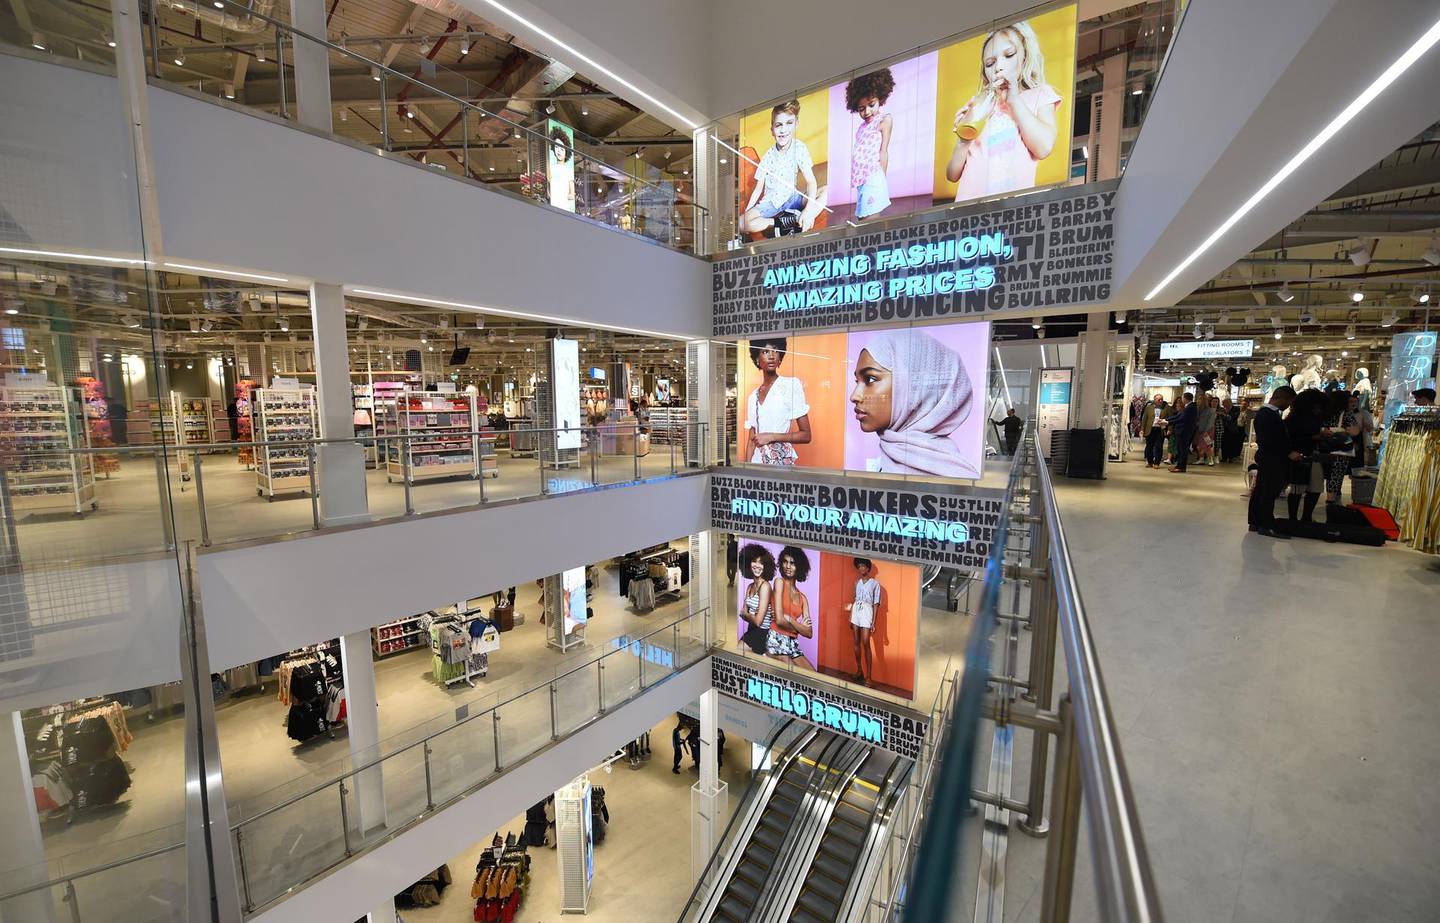 BIRMINGHAM, ENGLAND - APRIL 10: General view during the VIP Launch of the worlds largest Primark store on April 10, 2019 in Birmingham, England. (Photo by Stuart C. Wilson/Getty Images for Primark)